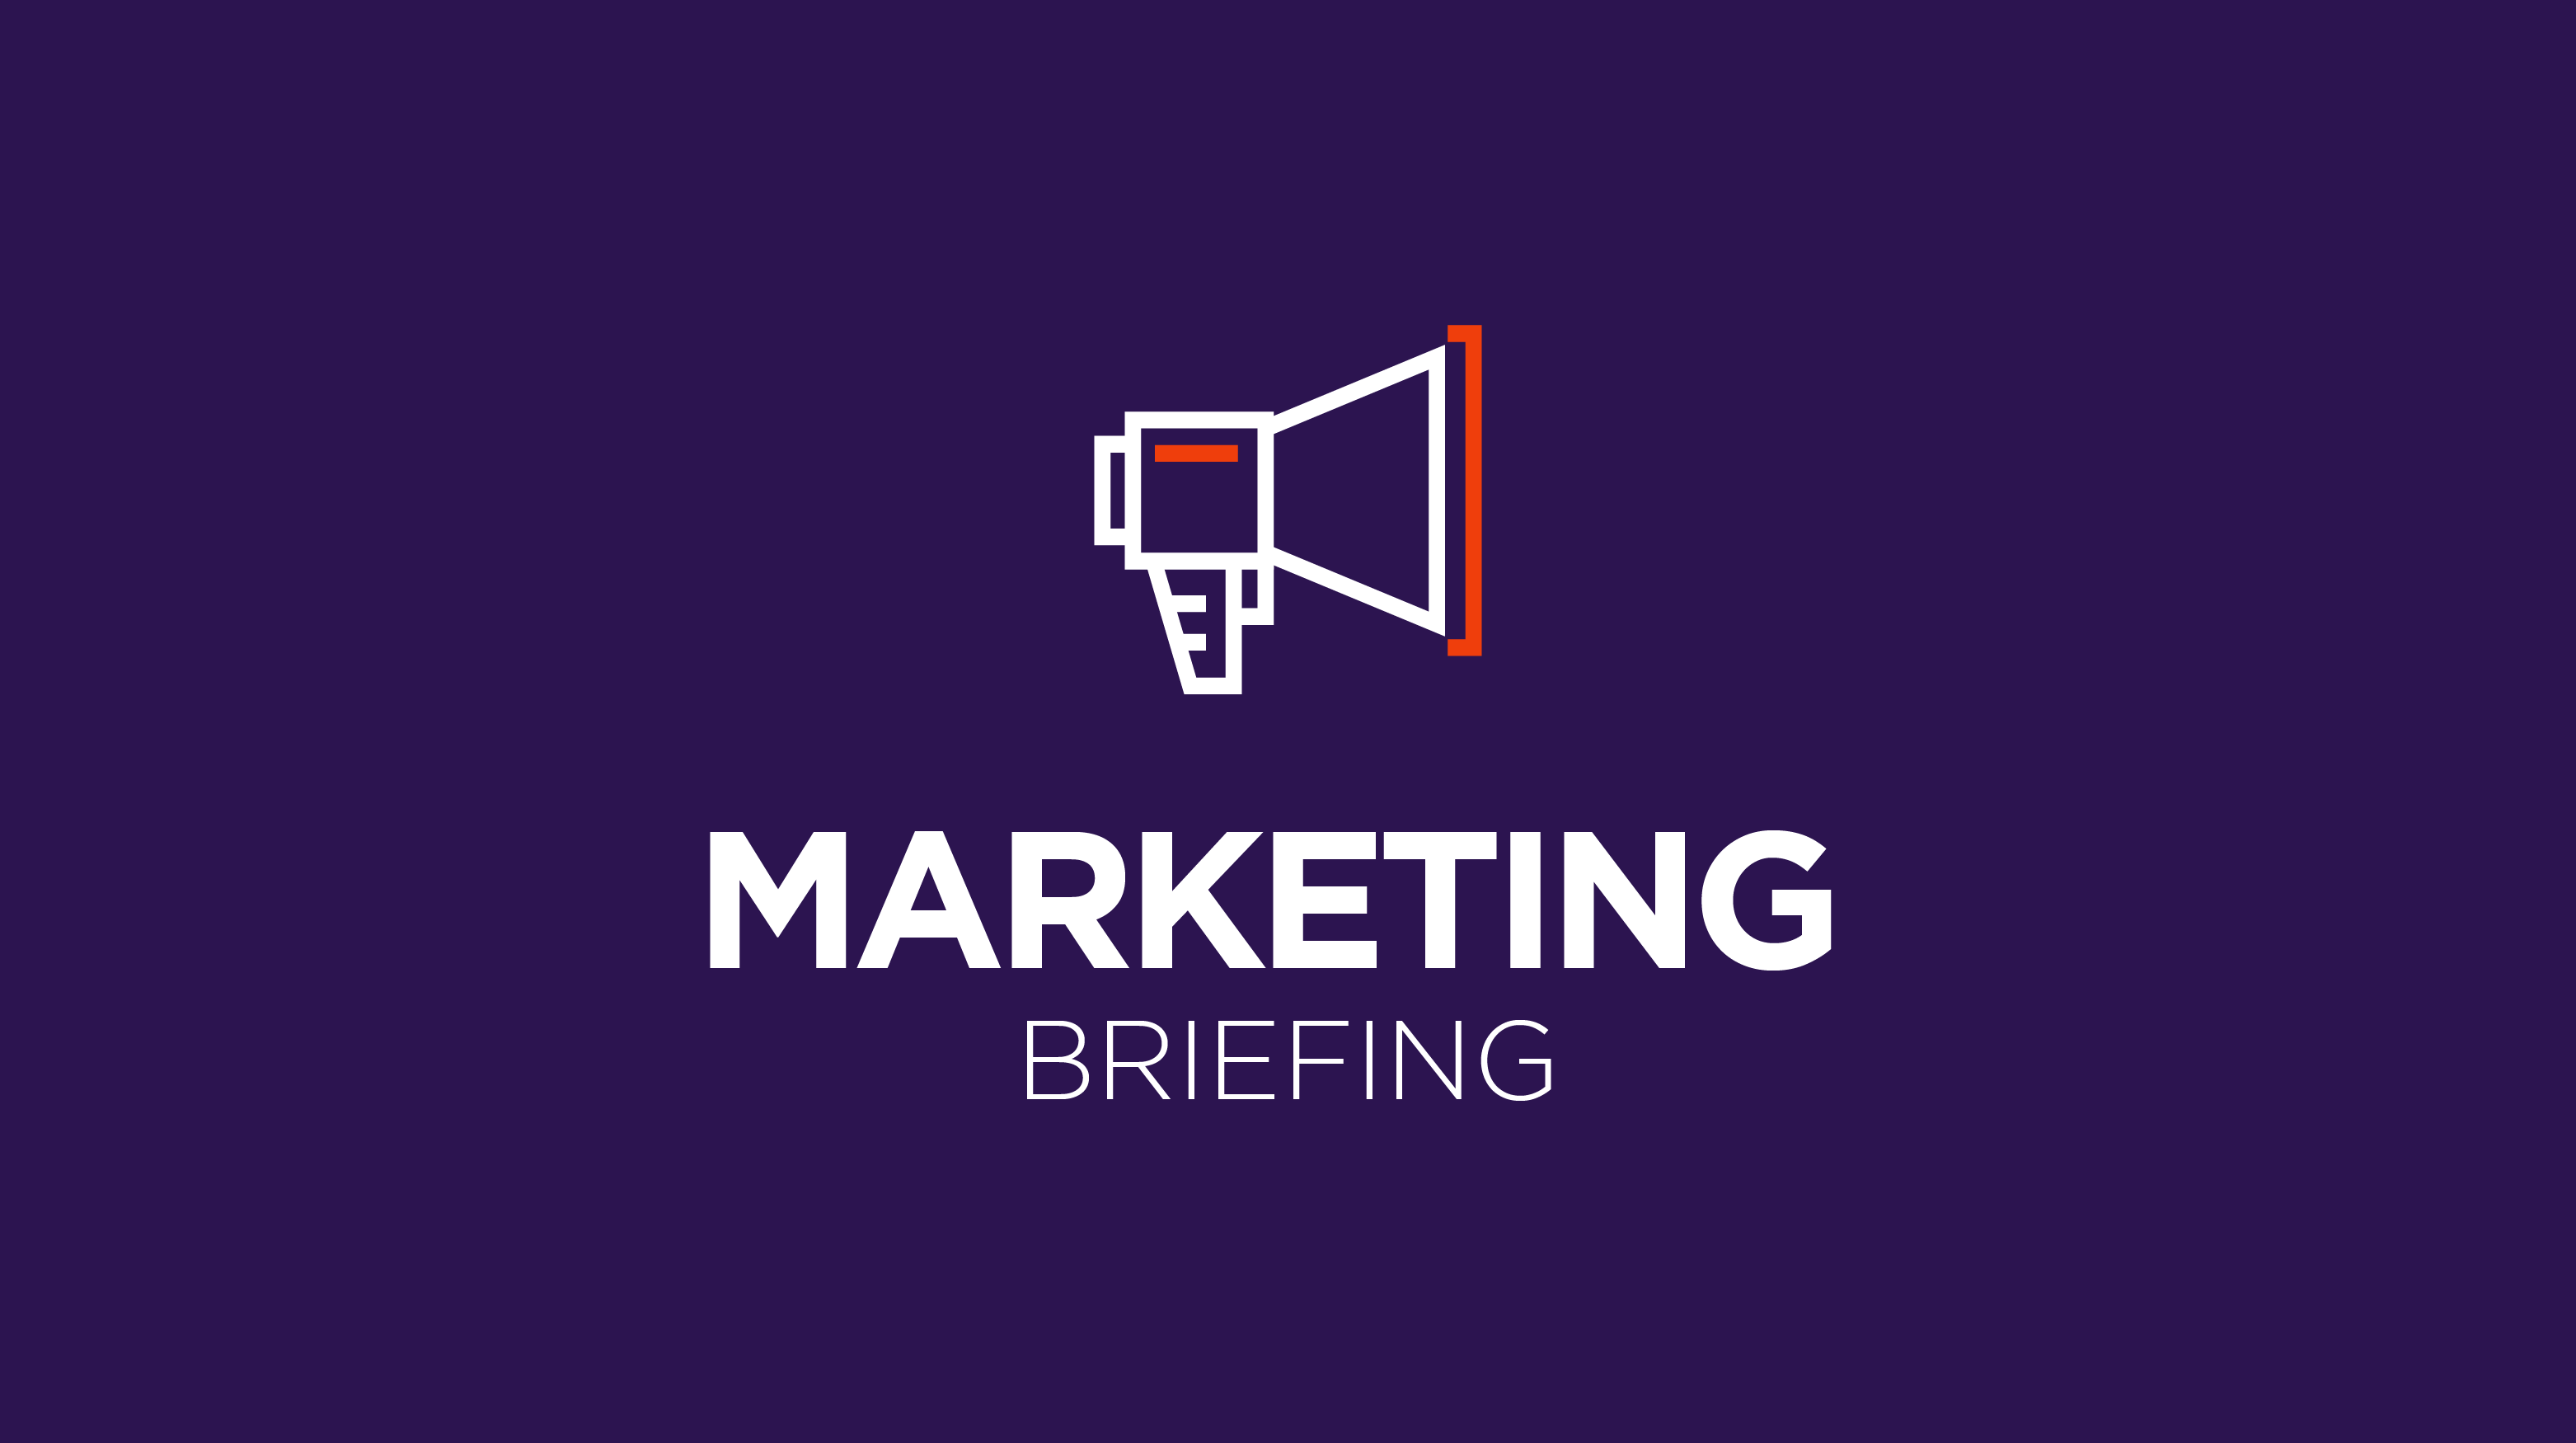 Marketing Briefing: Pride, sonic branding, and customer service